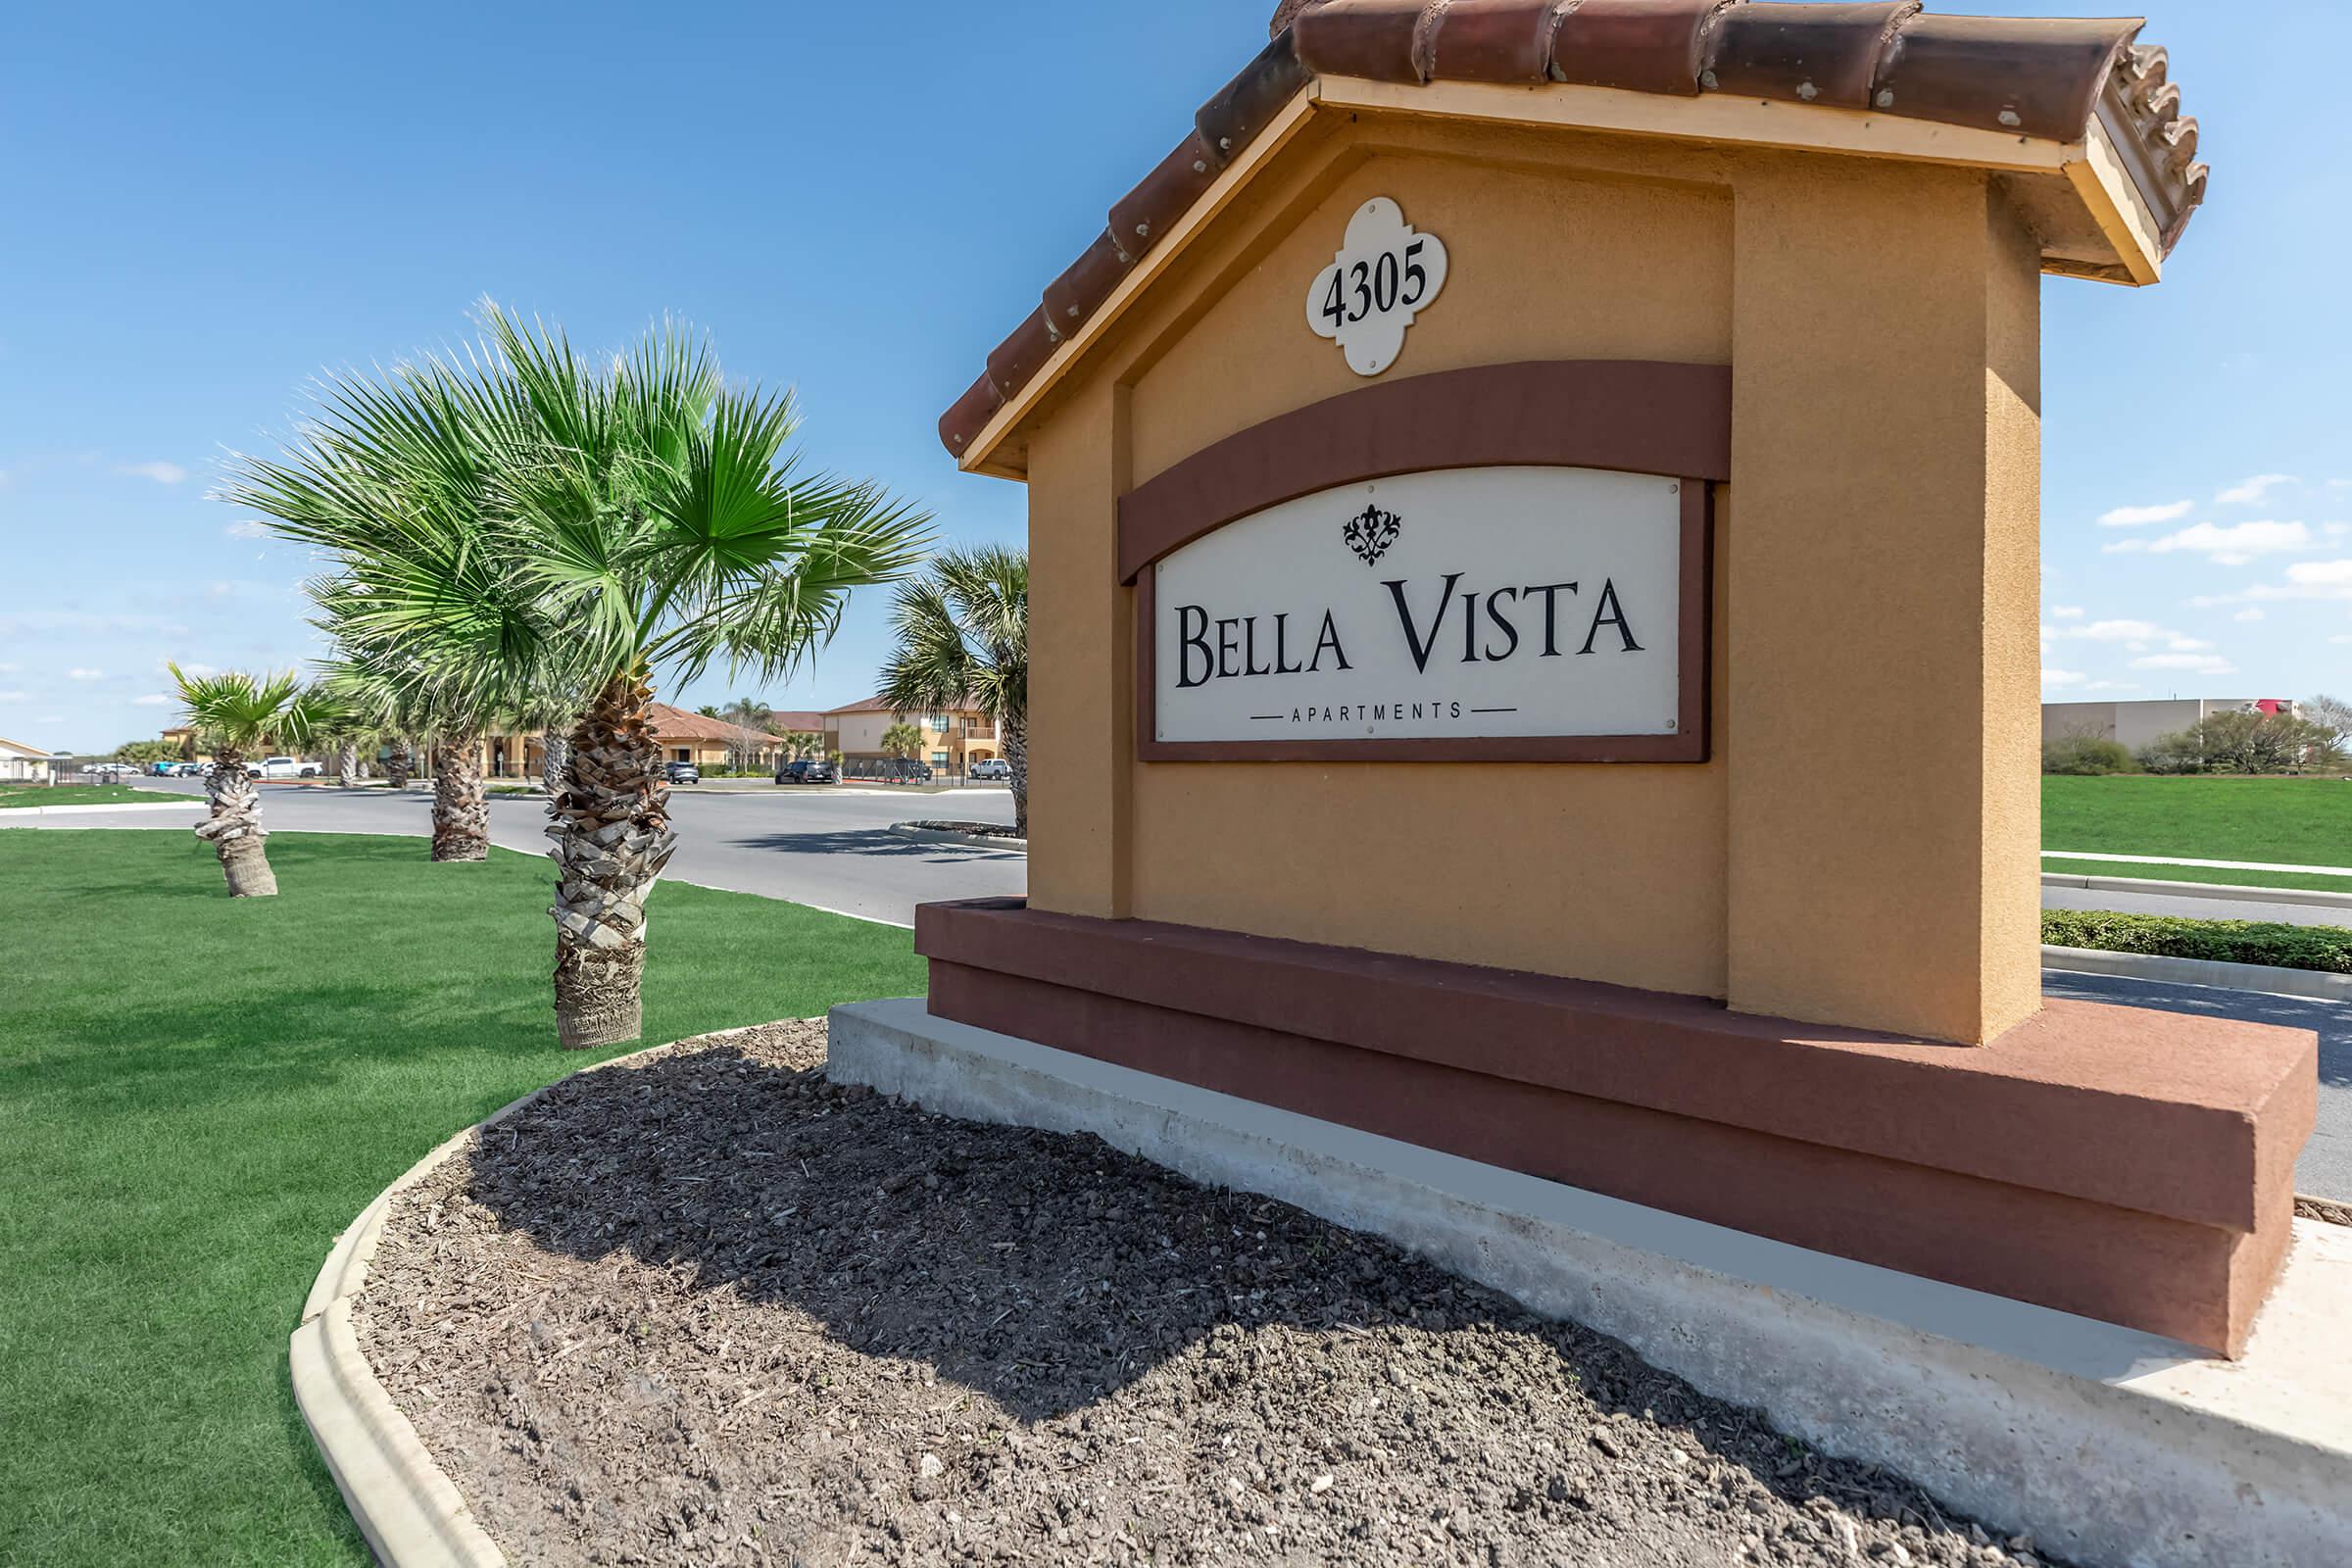 CALL BELLA VISTA APARTMENTS YOUR NEW HOME TODAY